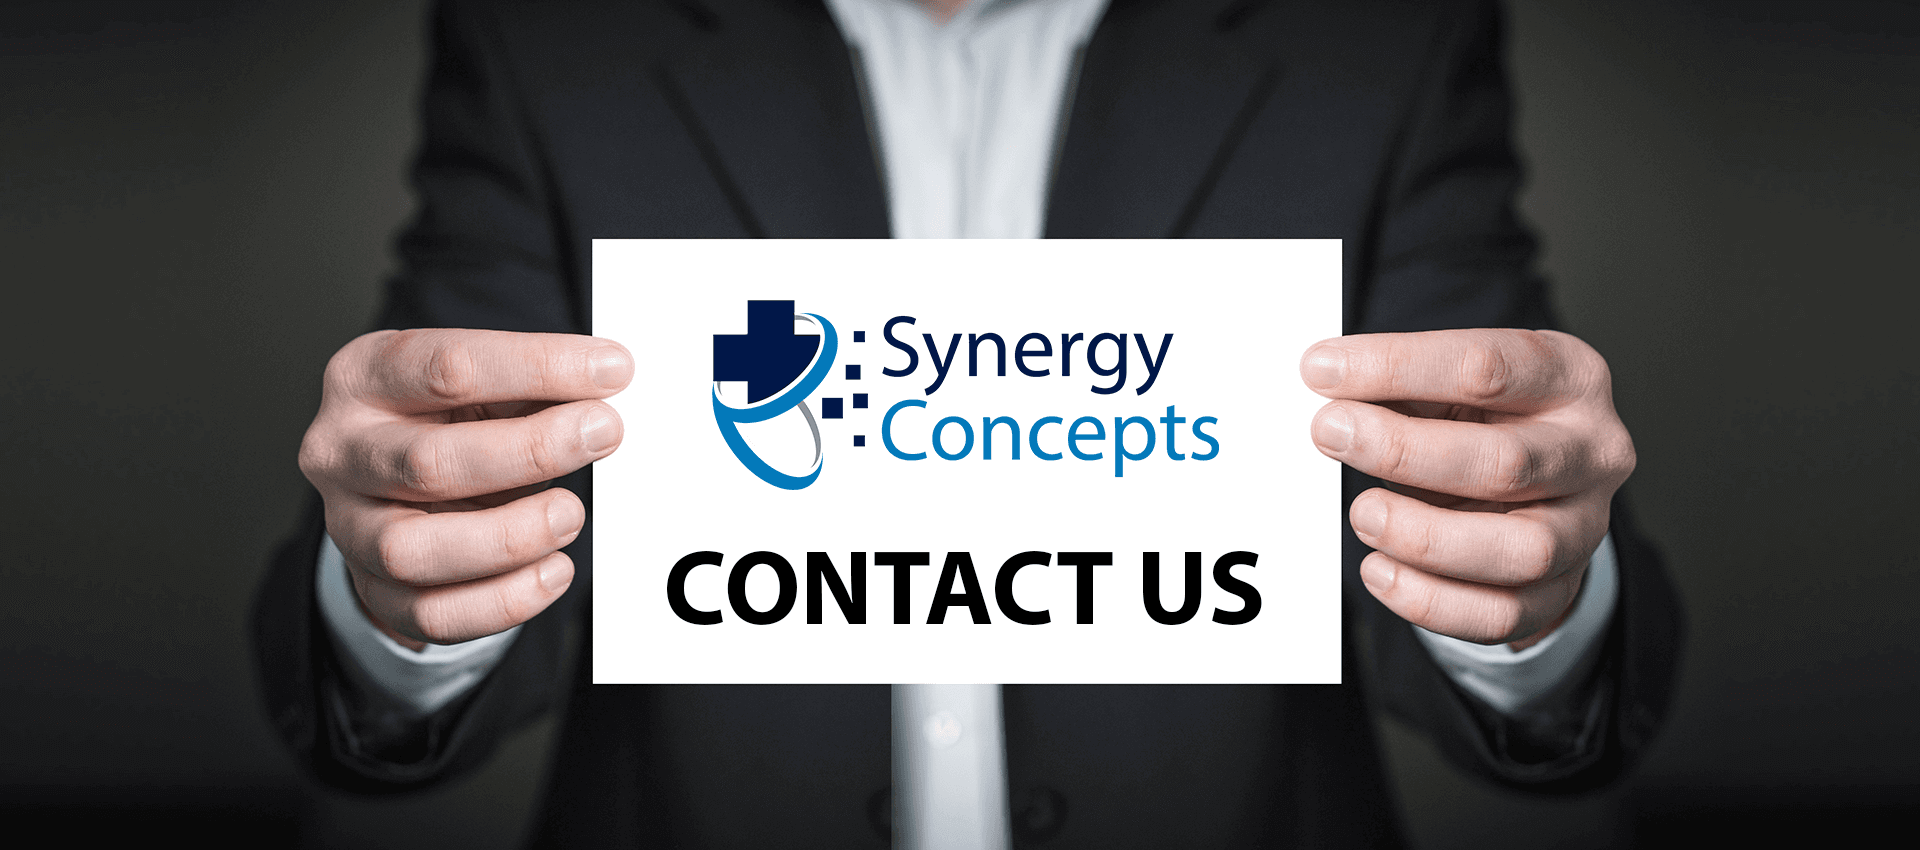 contact us at Synergy Concepts revenue cycle management and behavioral health medical billing